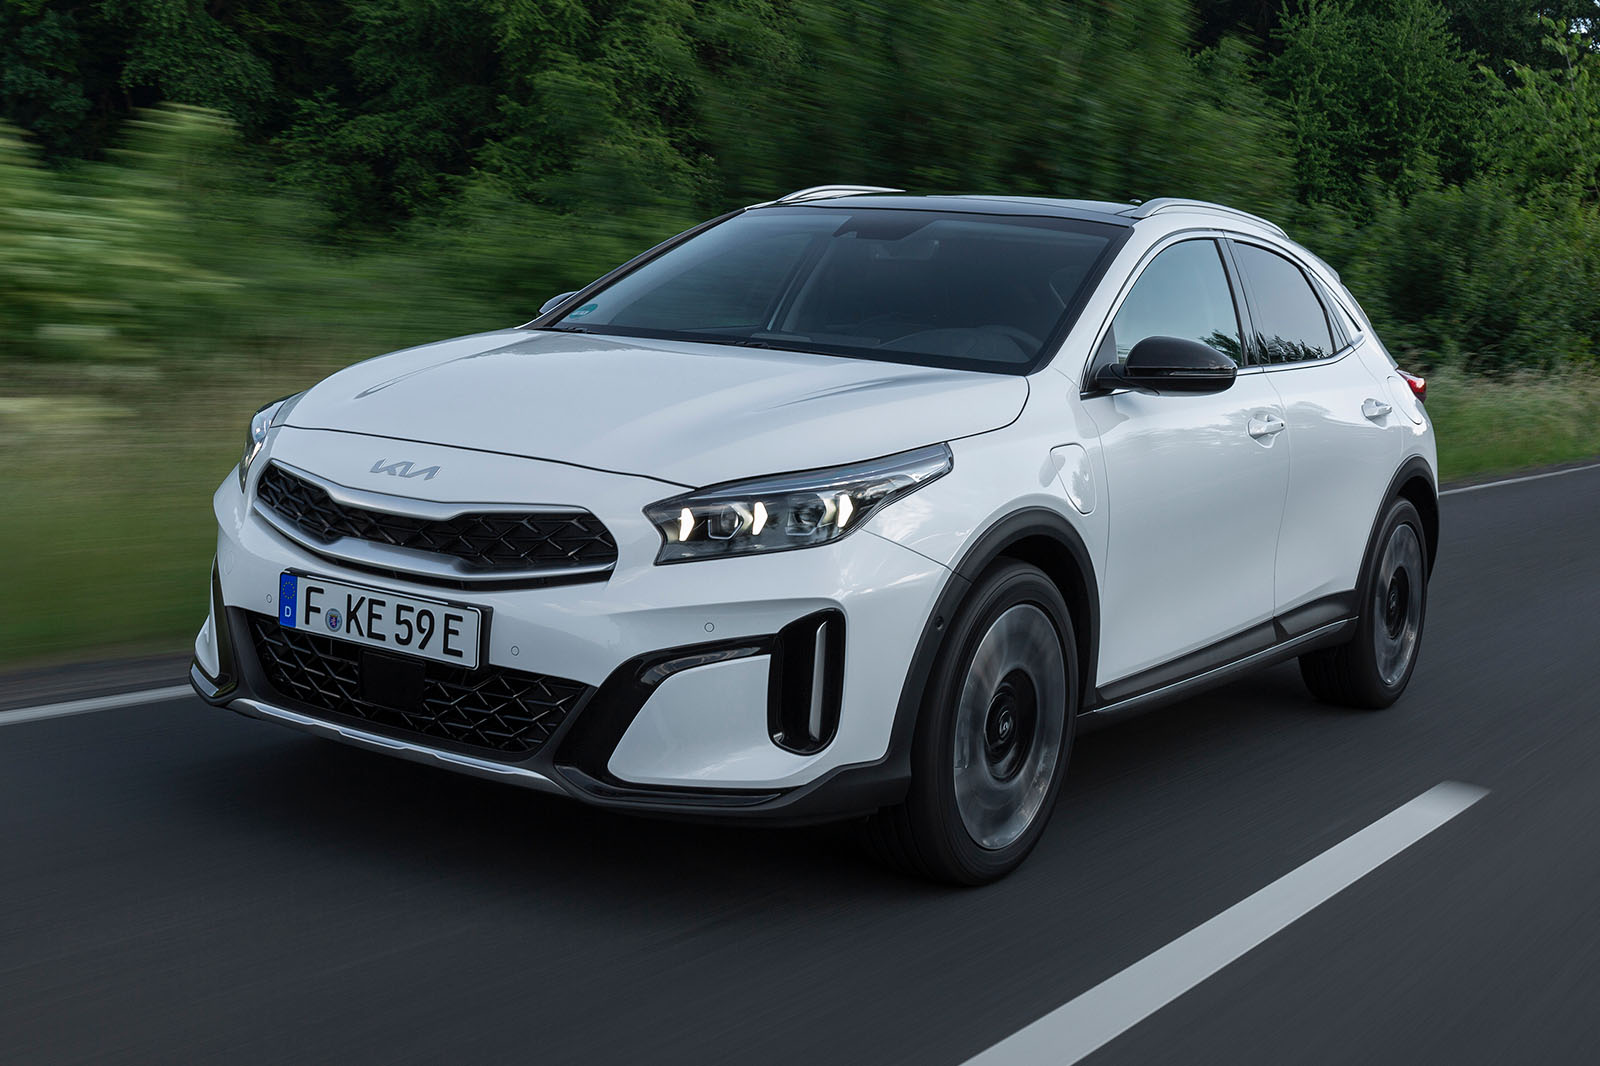 https://www.autocar.co.uk/sites/autocar.co.uk/files/images/car-reviews/first-drives/legacy/kia-xceed-pheve-2022001-trakcing-front.jpg